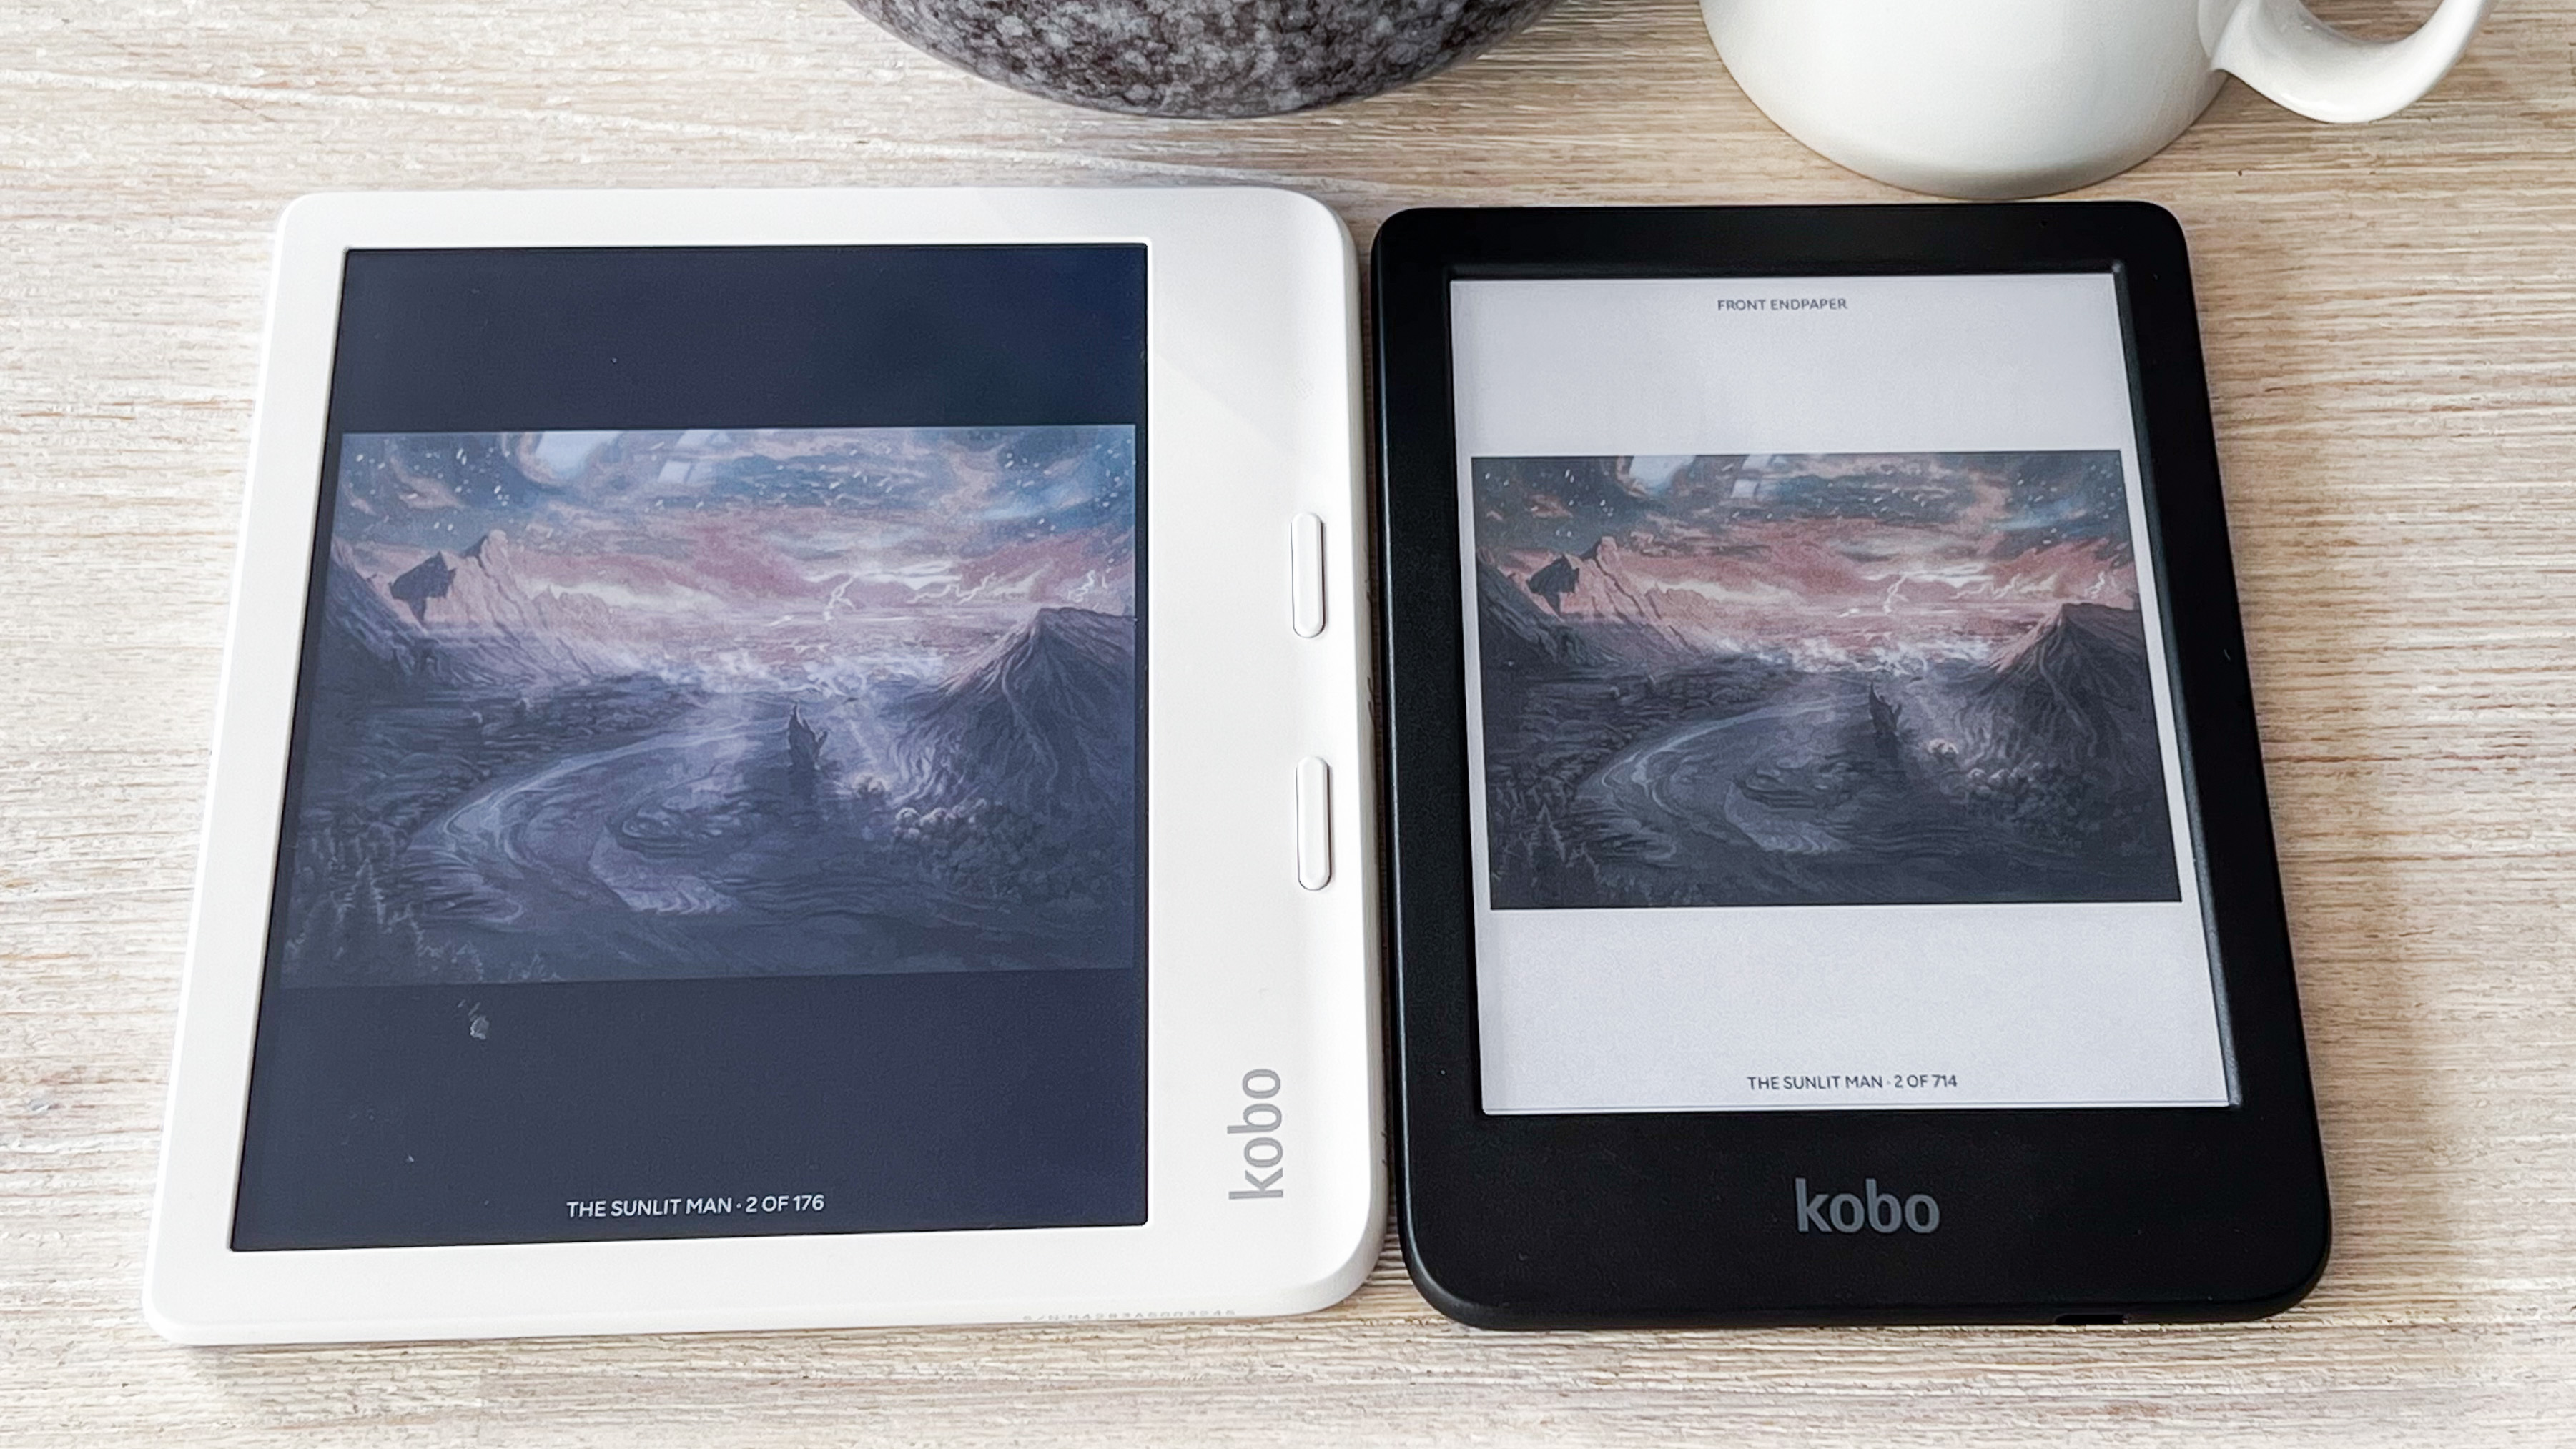 Kobo Clara Colour and Kobo Libra Colour displaying the same color image in regular mode and dark mode respectively